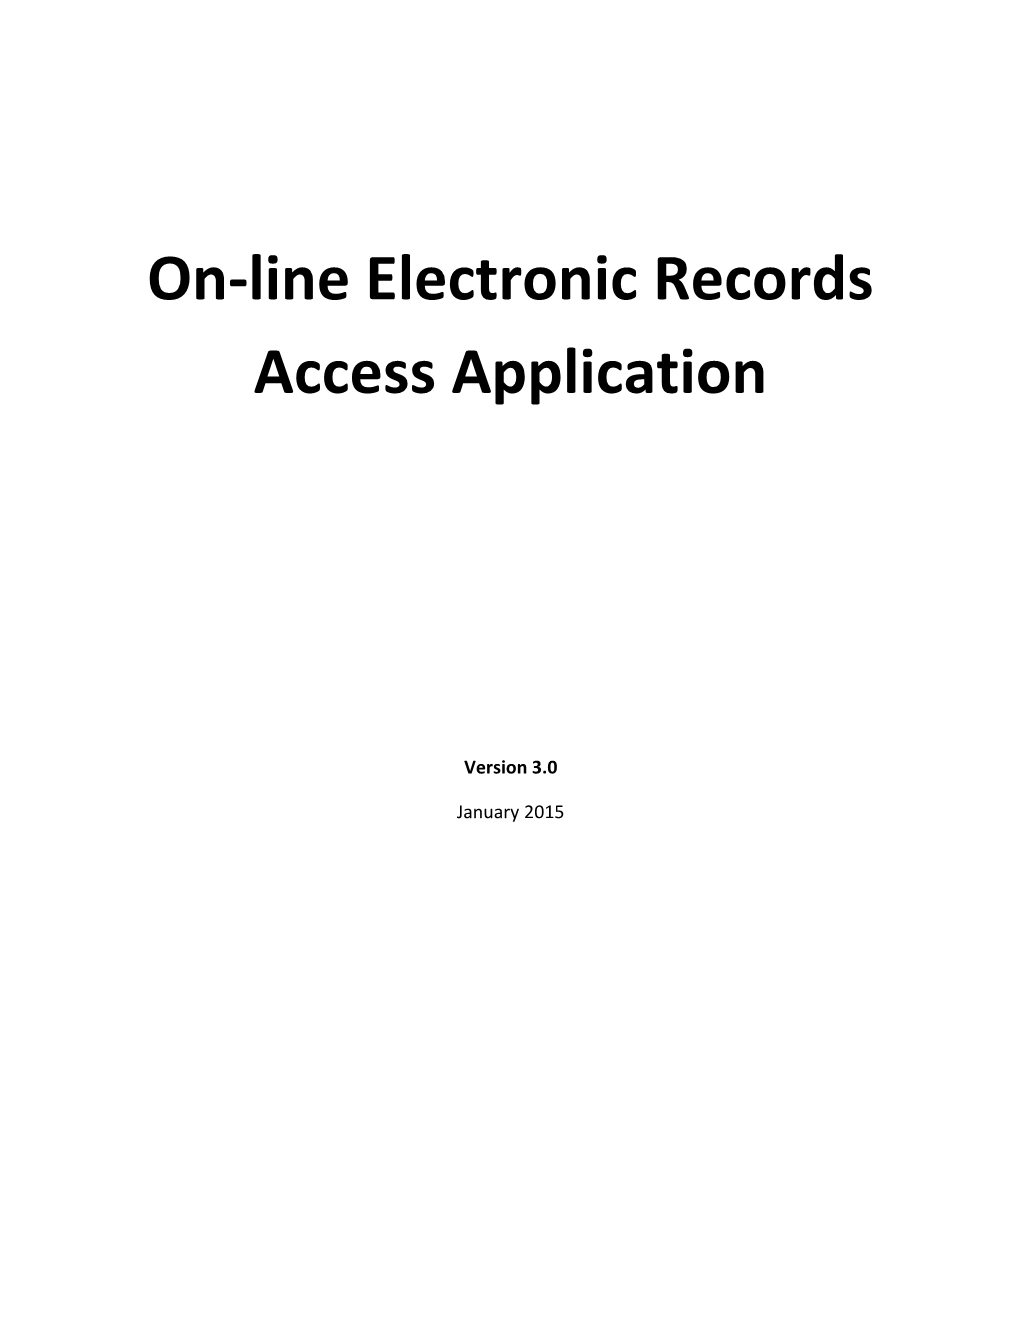 On-Line Electronic Records Access Application